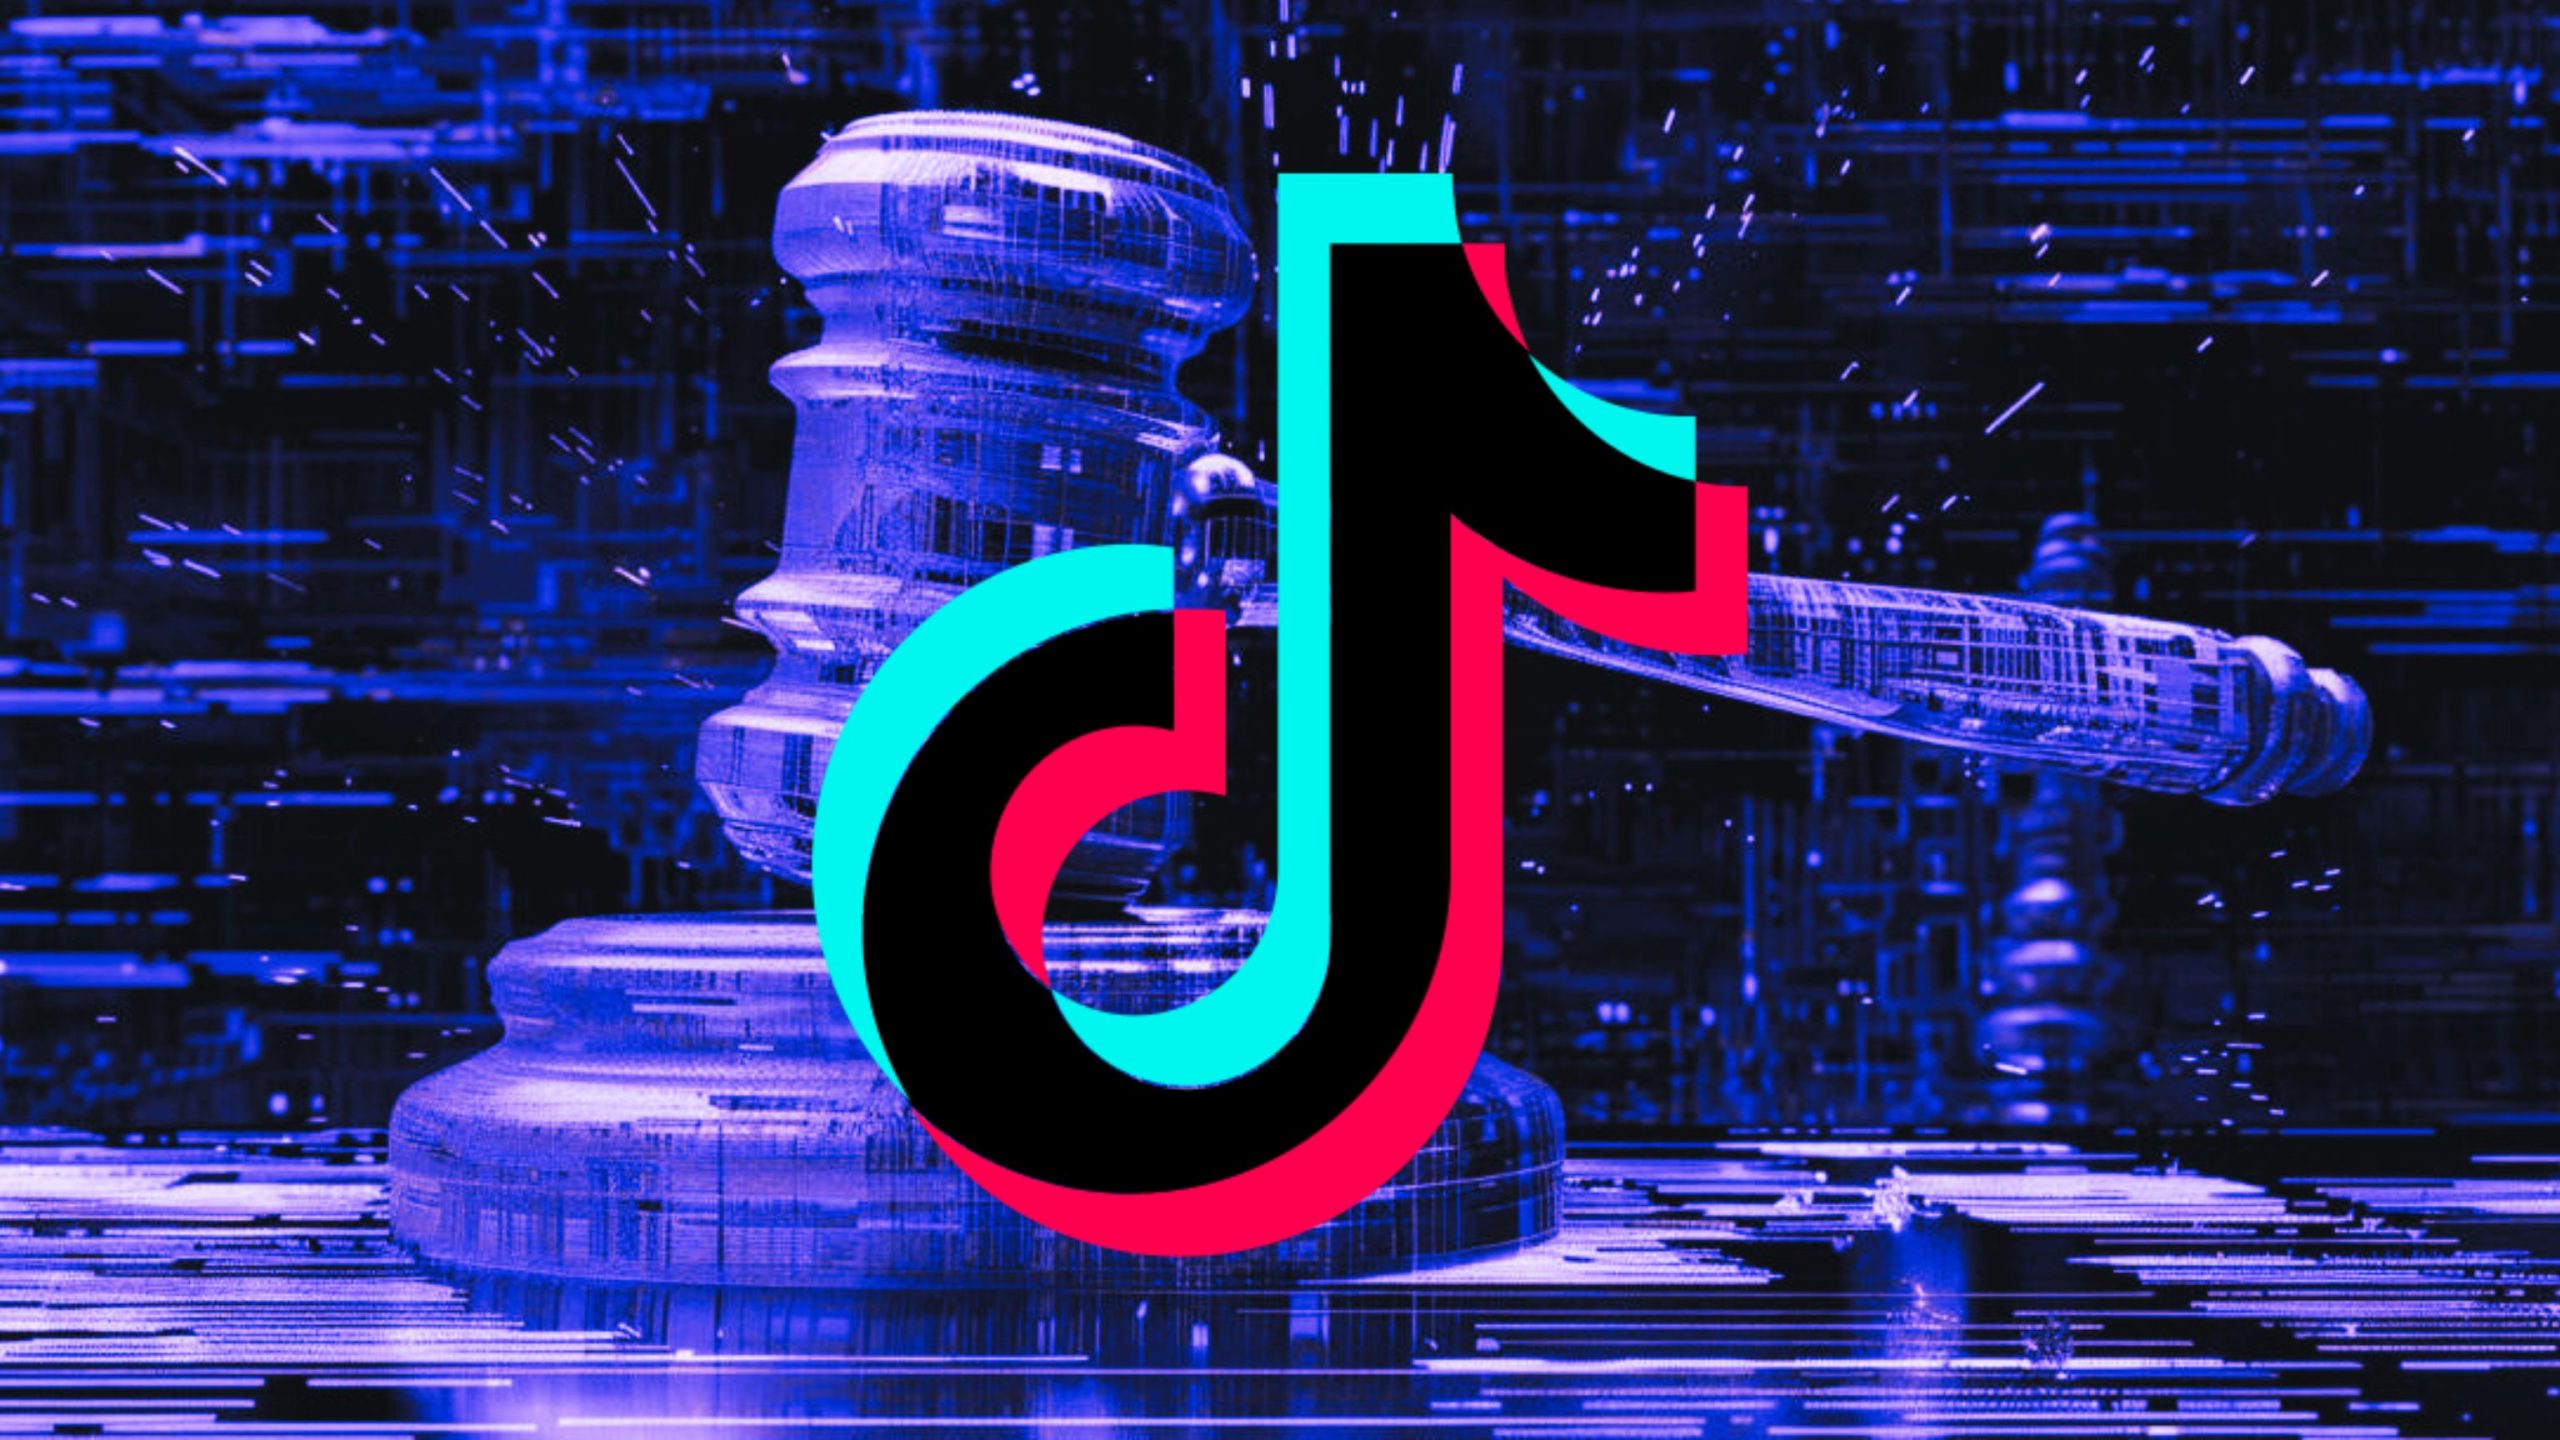 The Dangerous Language and First Amendment Challenges of the Rushed Anti-TikTok Bill